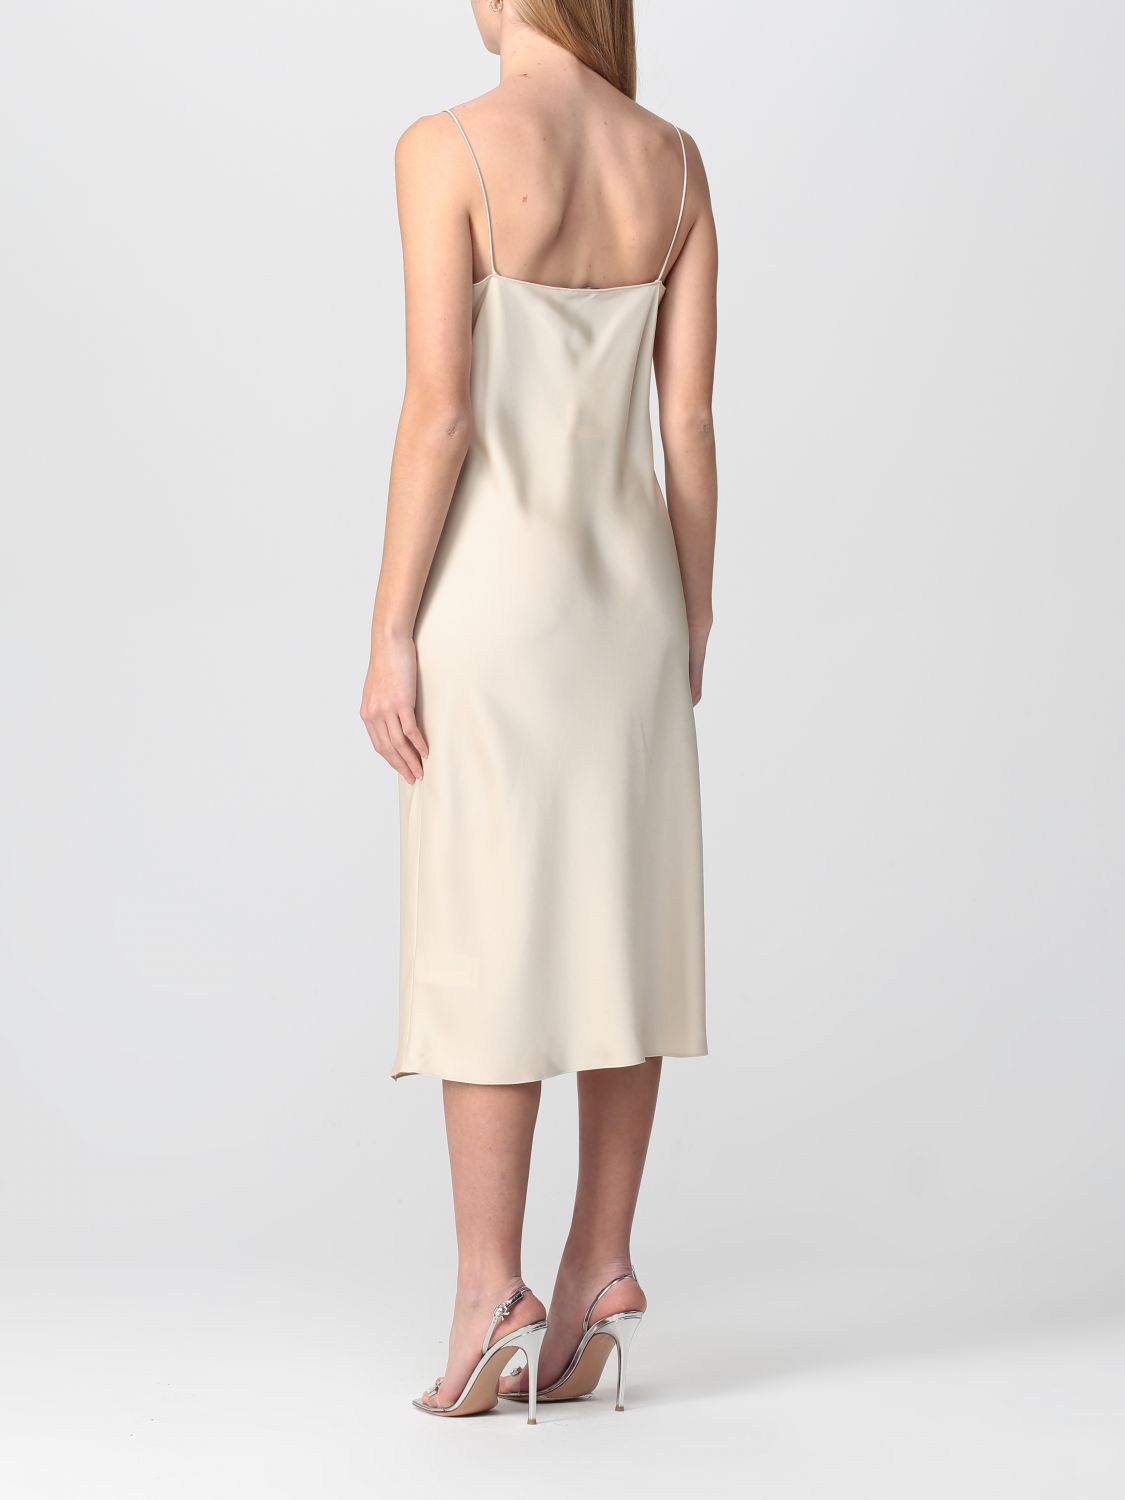 THEORY: dress for woman - Cream | Theory dress N0109602 online on ...